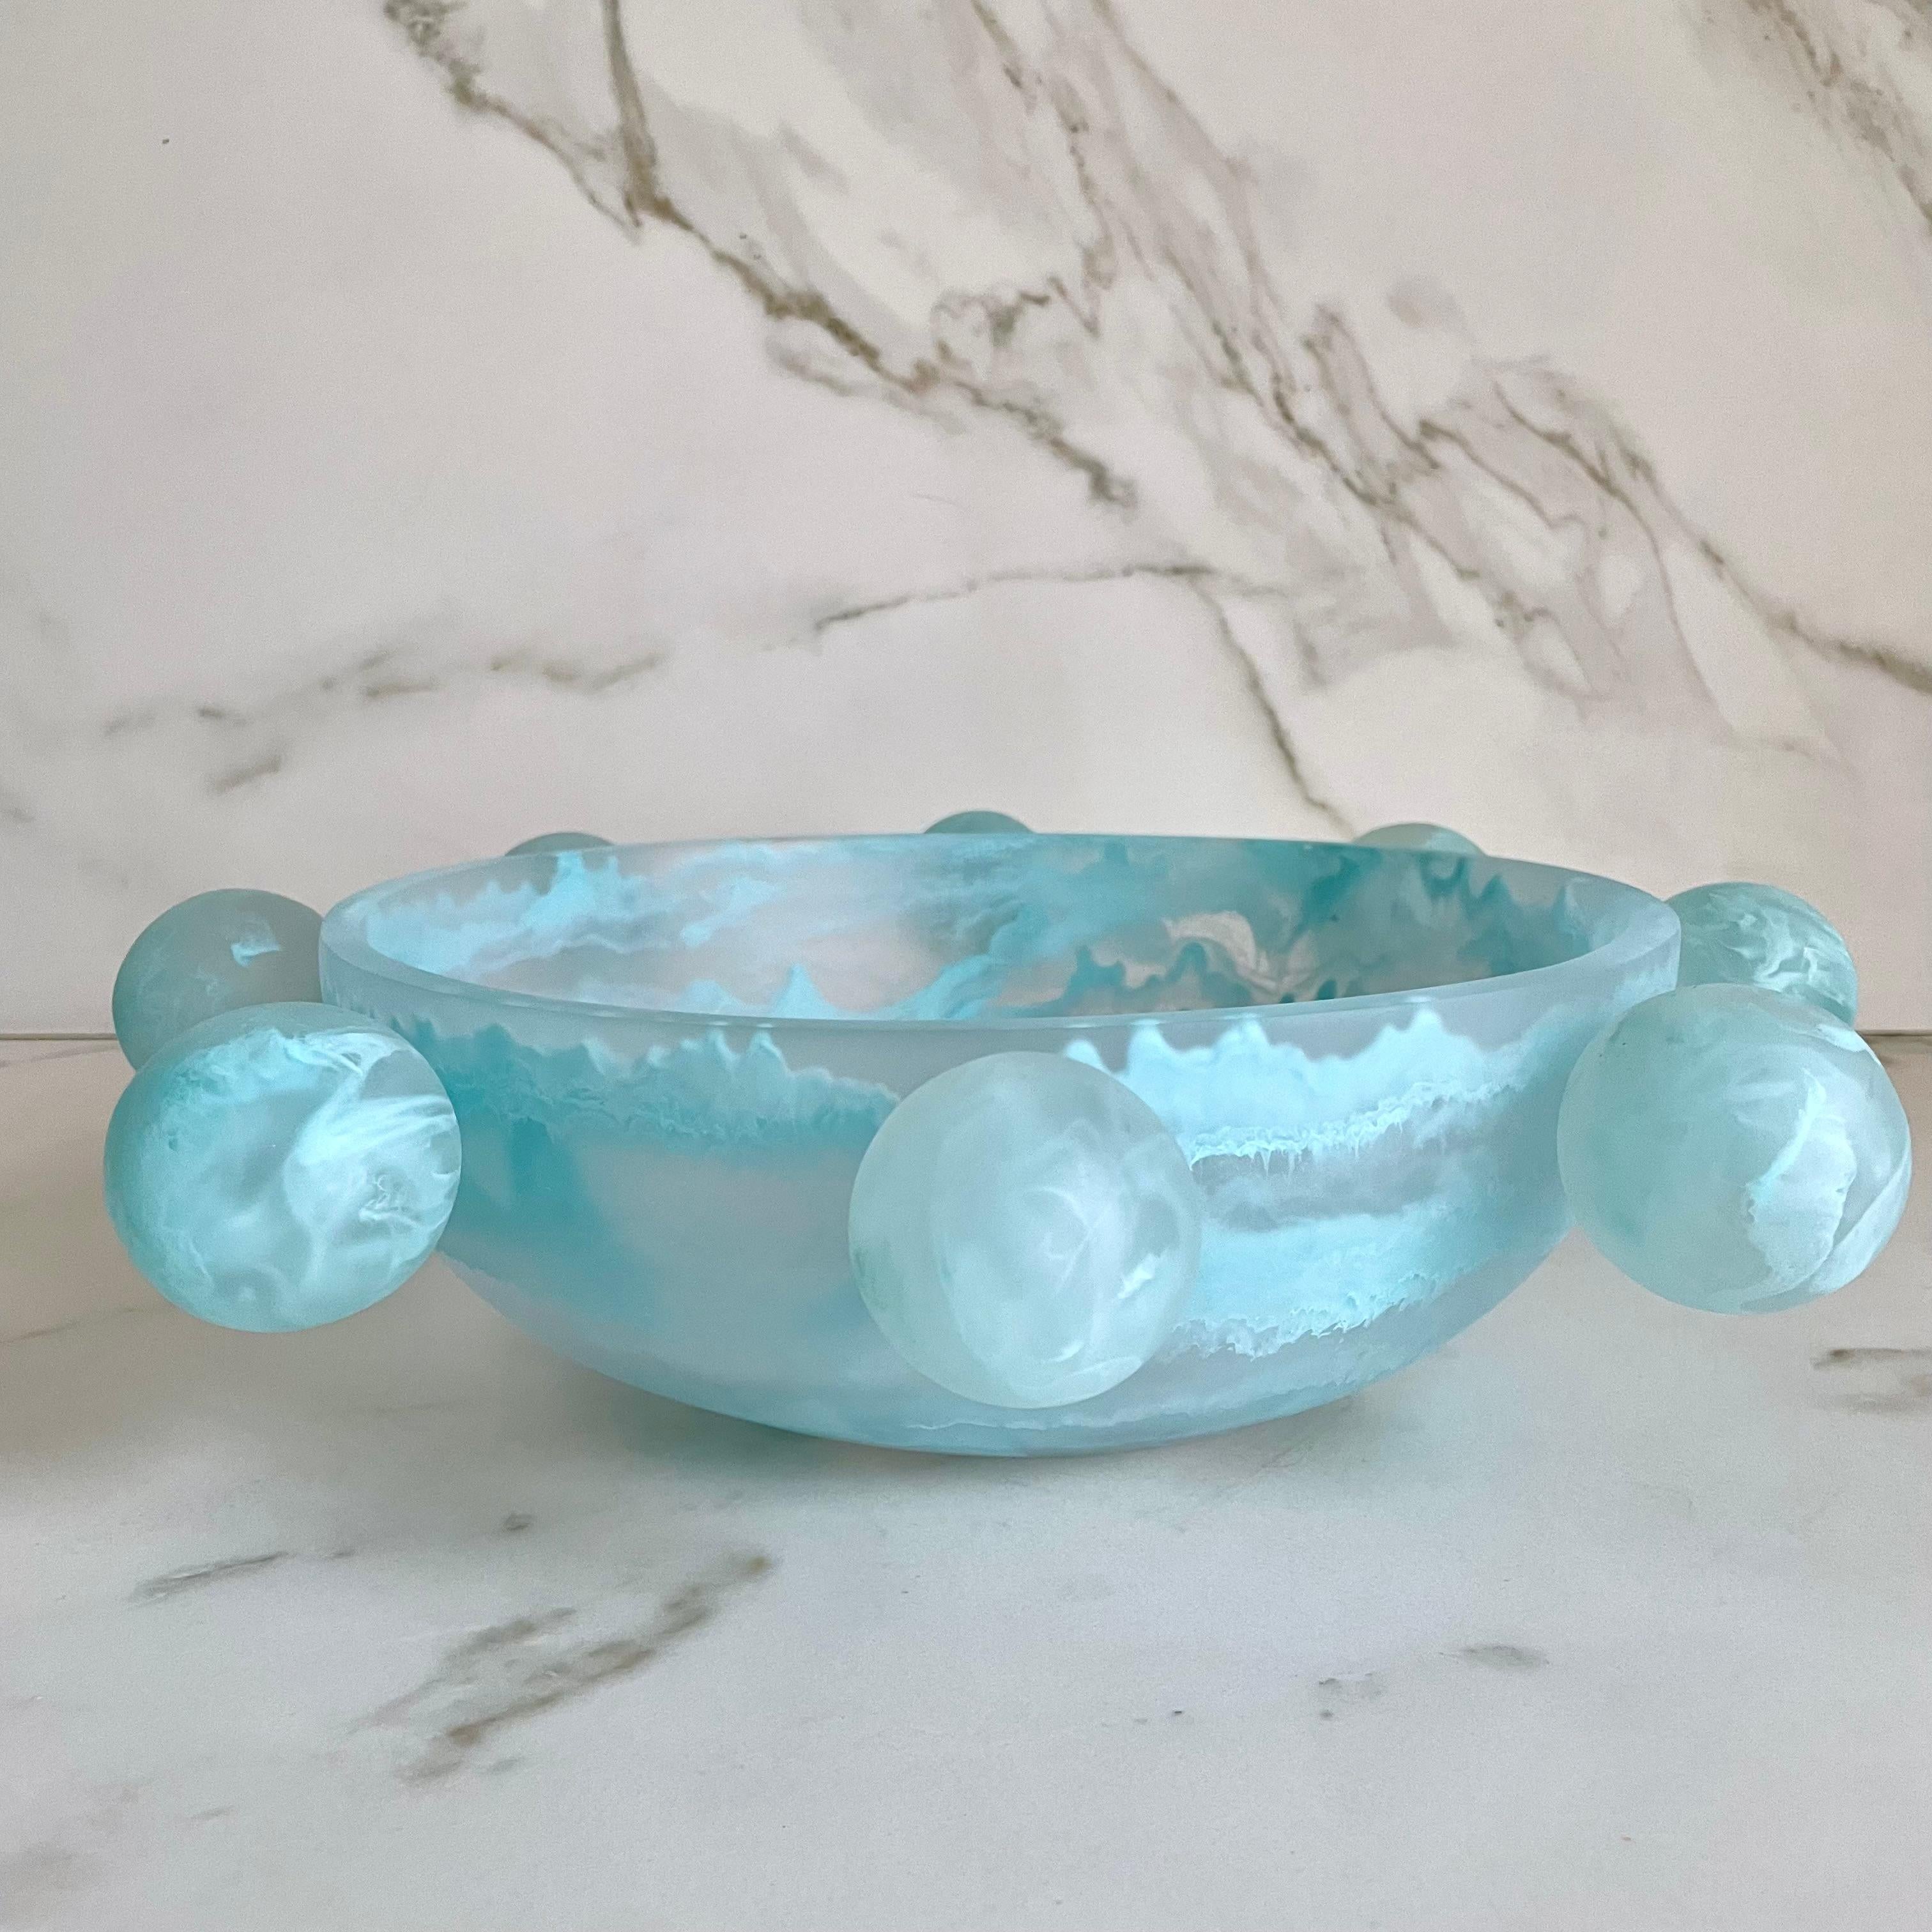 Our Bubble Bowl is handmade in clear resin with aqua marbled texture. Its modern, fun and unique design makes it a statement piece and can be used as decor or as a fruit platter.

Designed by Paola Valle and manufactured in Mexico City by